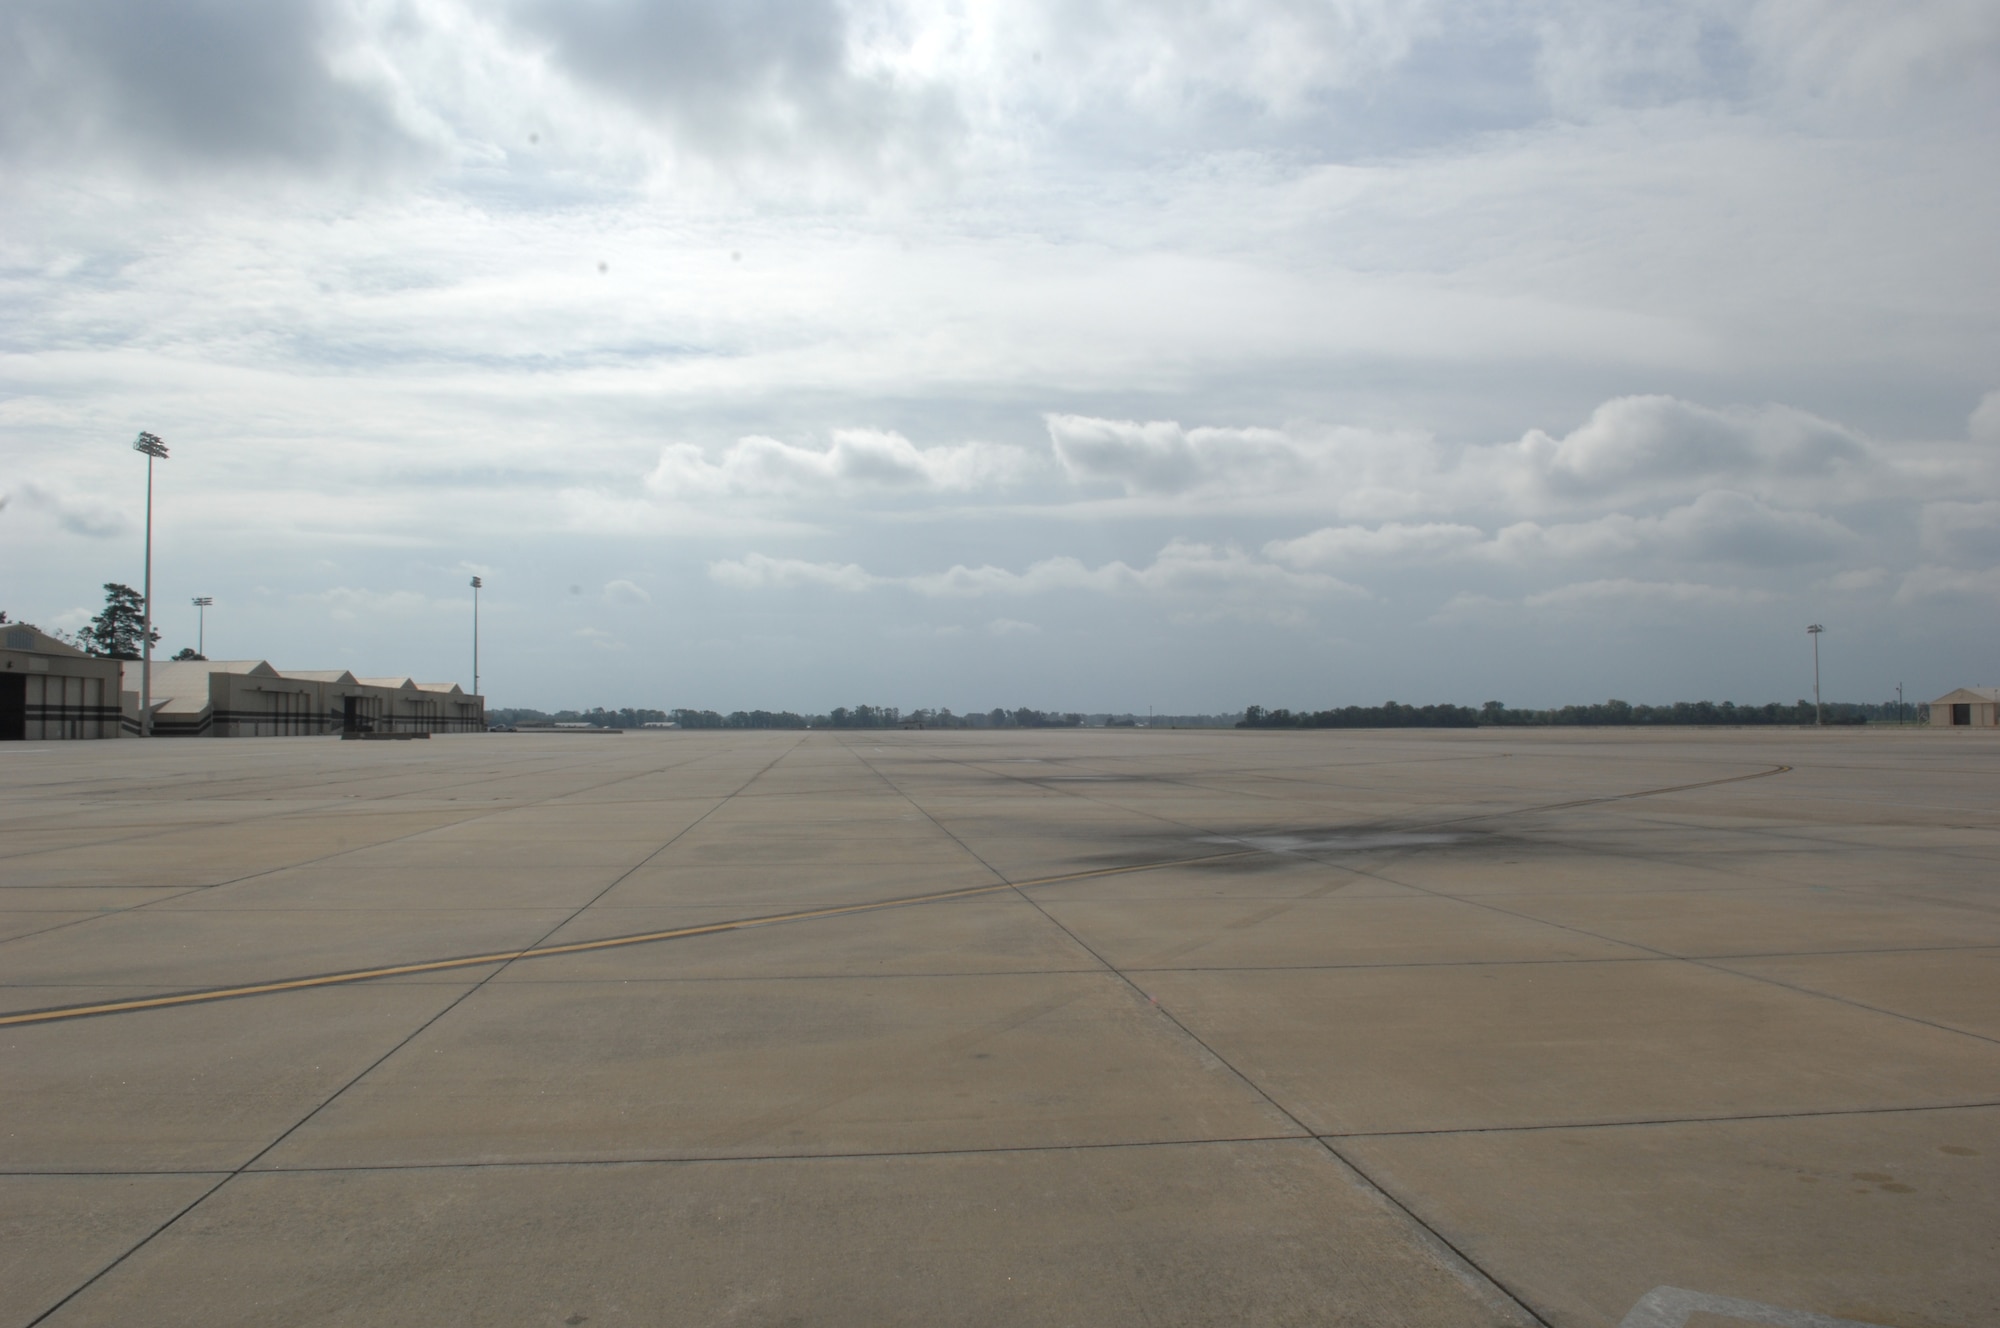 SEYMOUR JOHNSON AIR FORCE BASE, N.C. -- The flight-line is empty after more than 80 F-15 E Strike Eagles and three KC-135 Stratotankers evacuate to Wright Patterson Air Force Base, Ohio, for Tropical Storm Hanna. (U.S. Air Force Photo by Airman 1st Class Rae Henline)